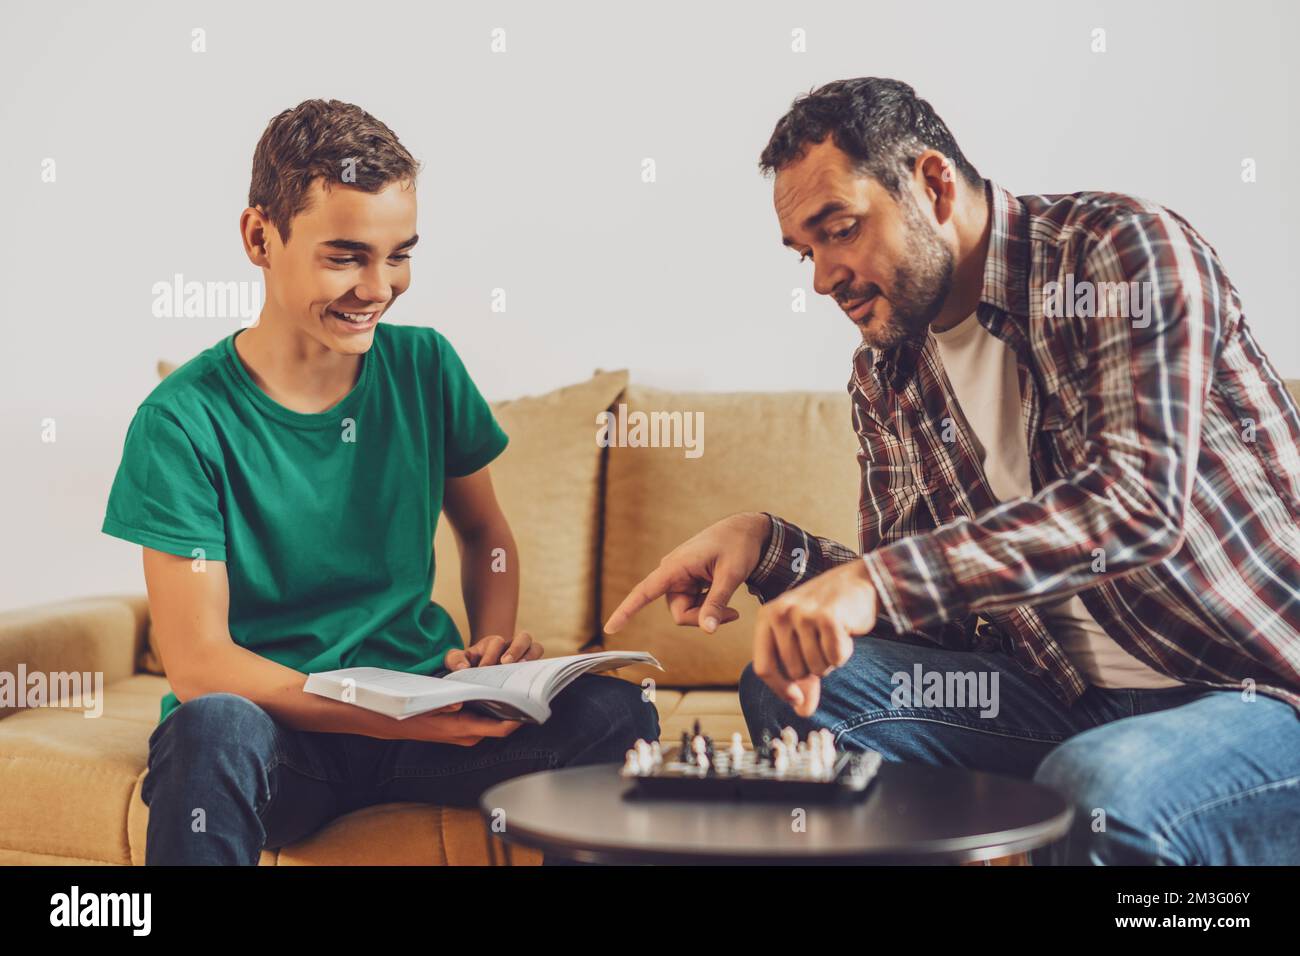 Father and son are playing chess at home. Boy is learning about chess. Stock Photo